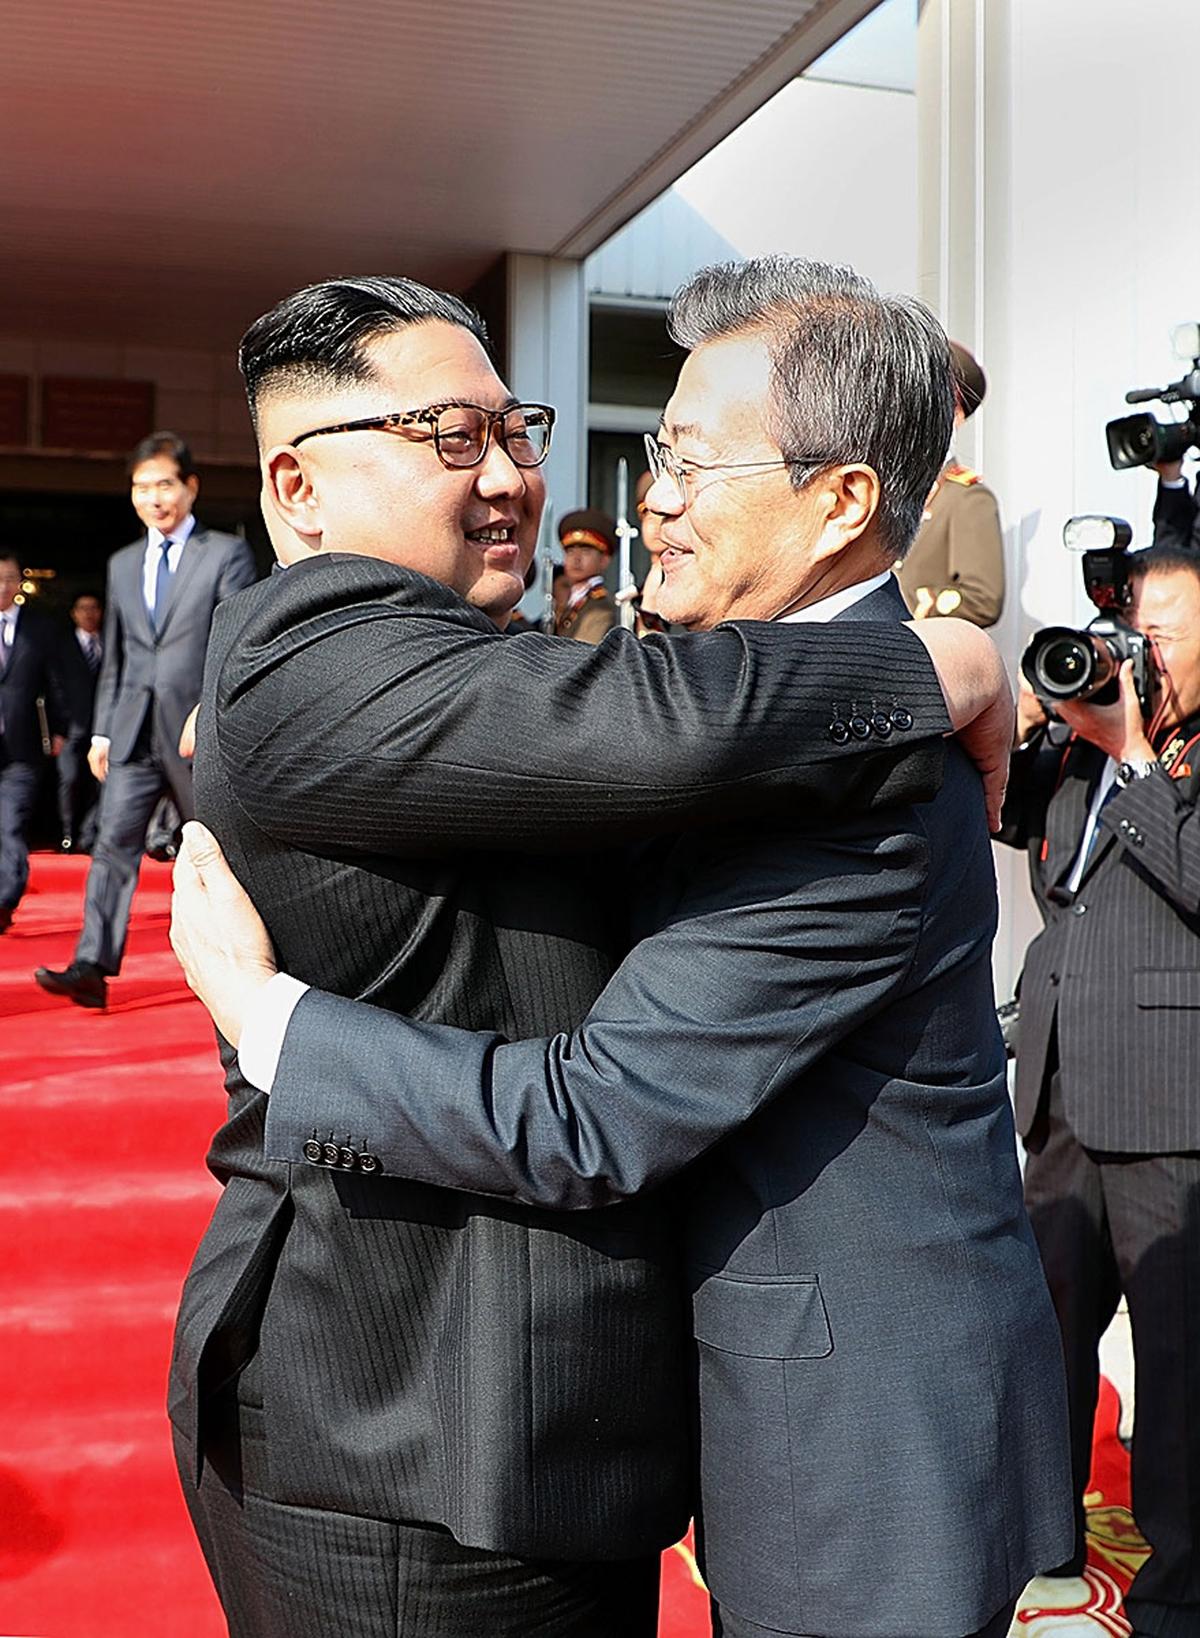 In this handout image provided by South Korean Presidential Blue House, South Korean President Moon Jae-in (R) hugs with North Korean leader Kim Jong Un (L) before their meeting on May 26, 2018 in Panmunjom, North Korea. (South Korean Presidential Blue House via Getty Images)